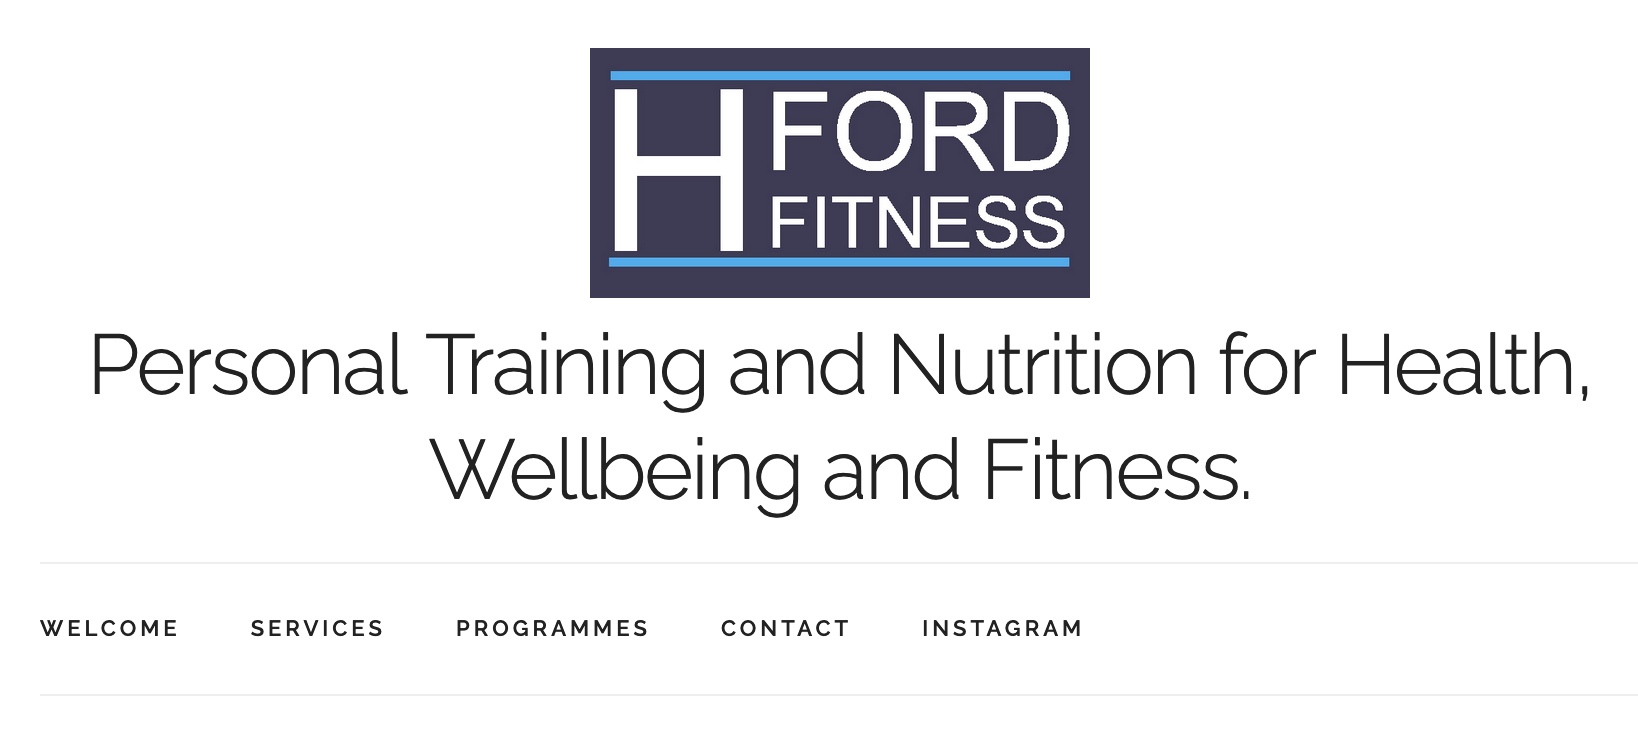 web site screen shot - fitness and nutrition